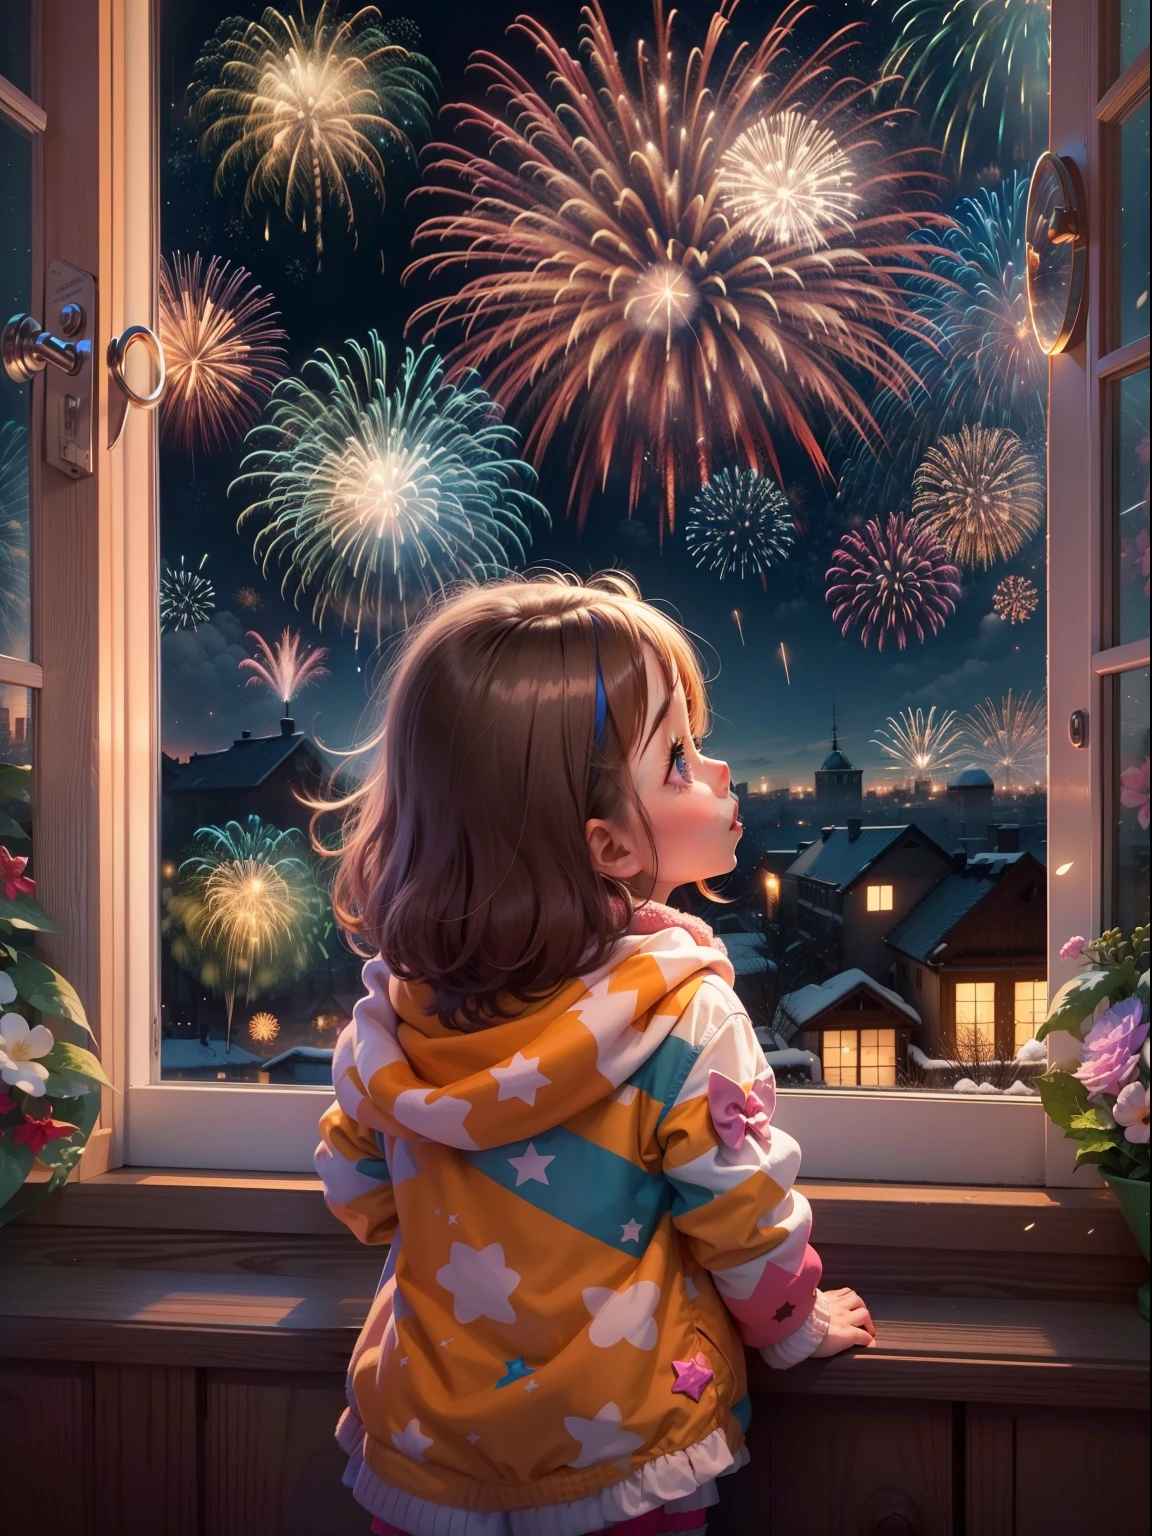 Funny picture，at winter season，Cute  with her back looking out the window，baby cats，Brilliant fireworks outside the window，Huge fireworks，Extremely colorful，Colorful